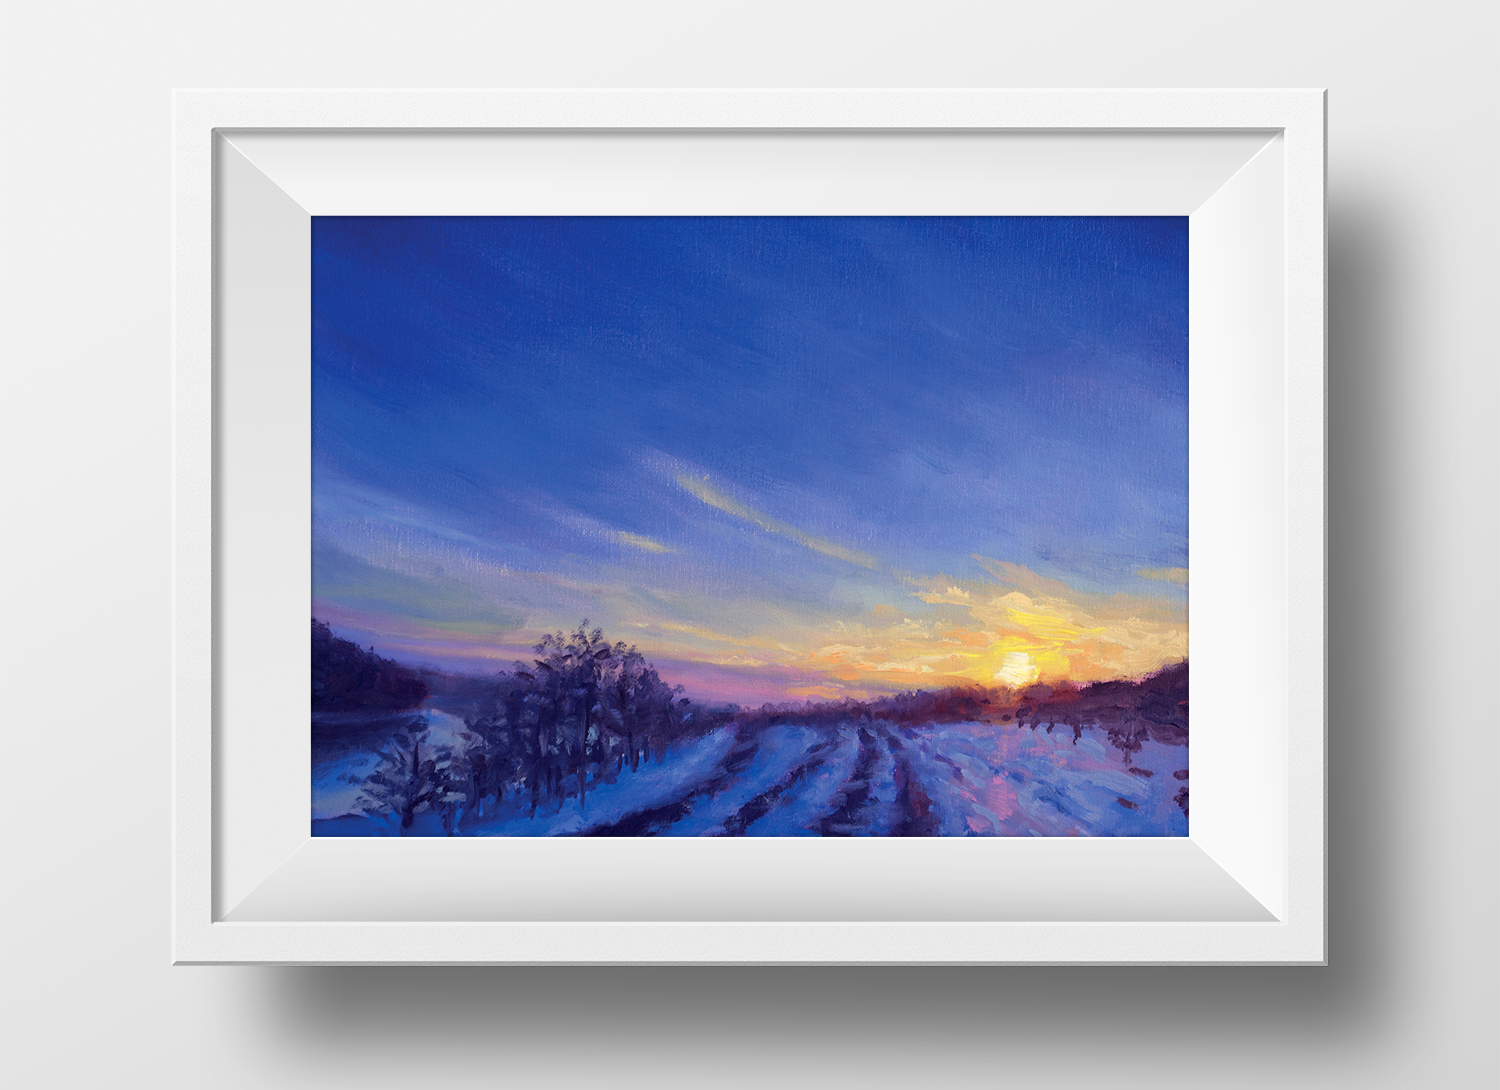 Soft Winter Morning Original Oil Painting by Andrew Gaia in frame